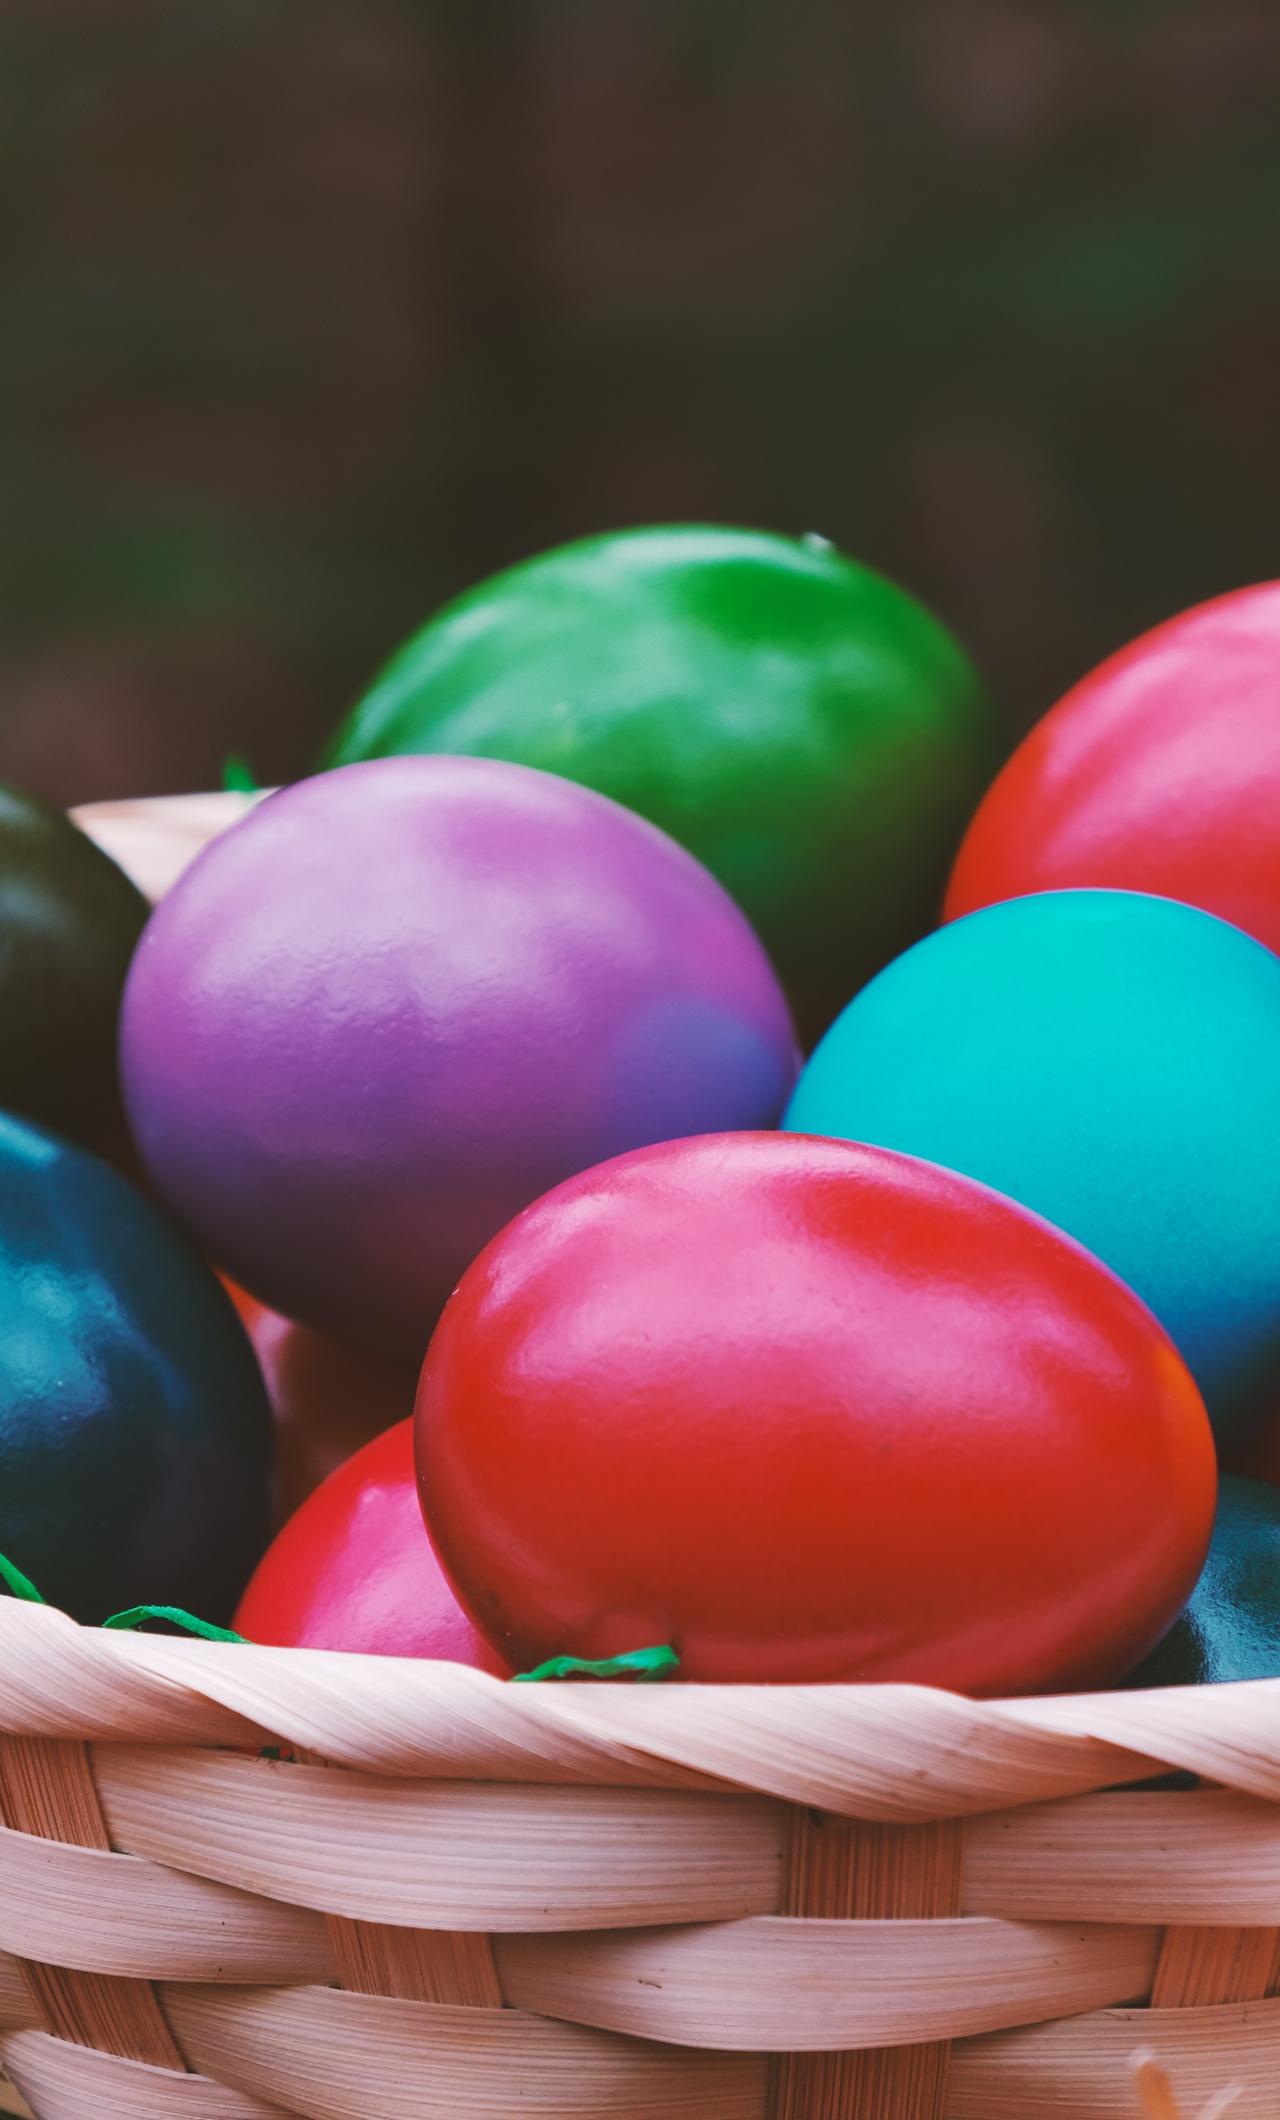 Download 1280x2120 wallpaper basket, easter eggs, colorful, iphone